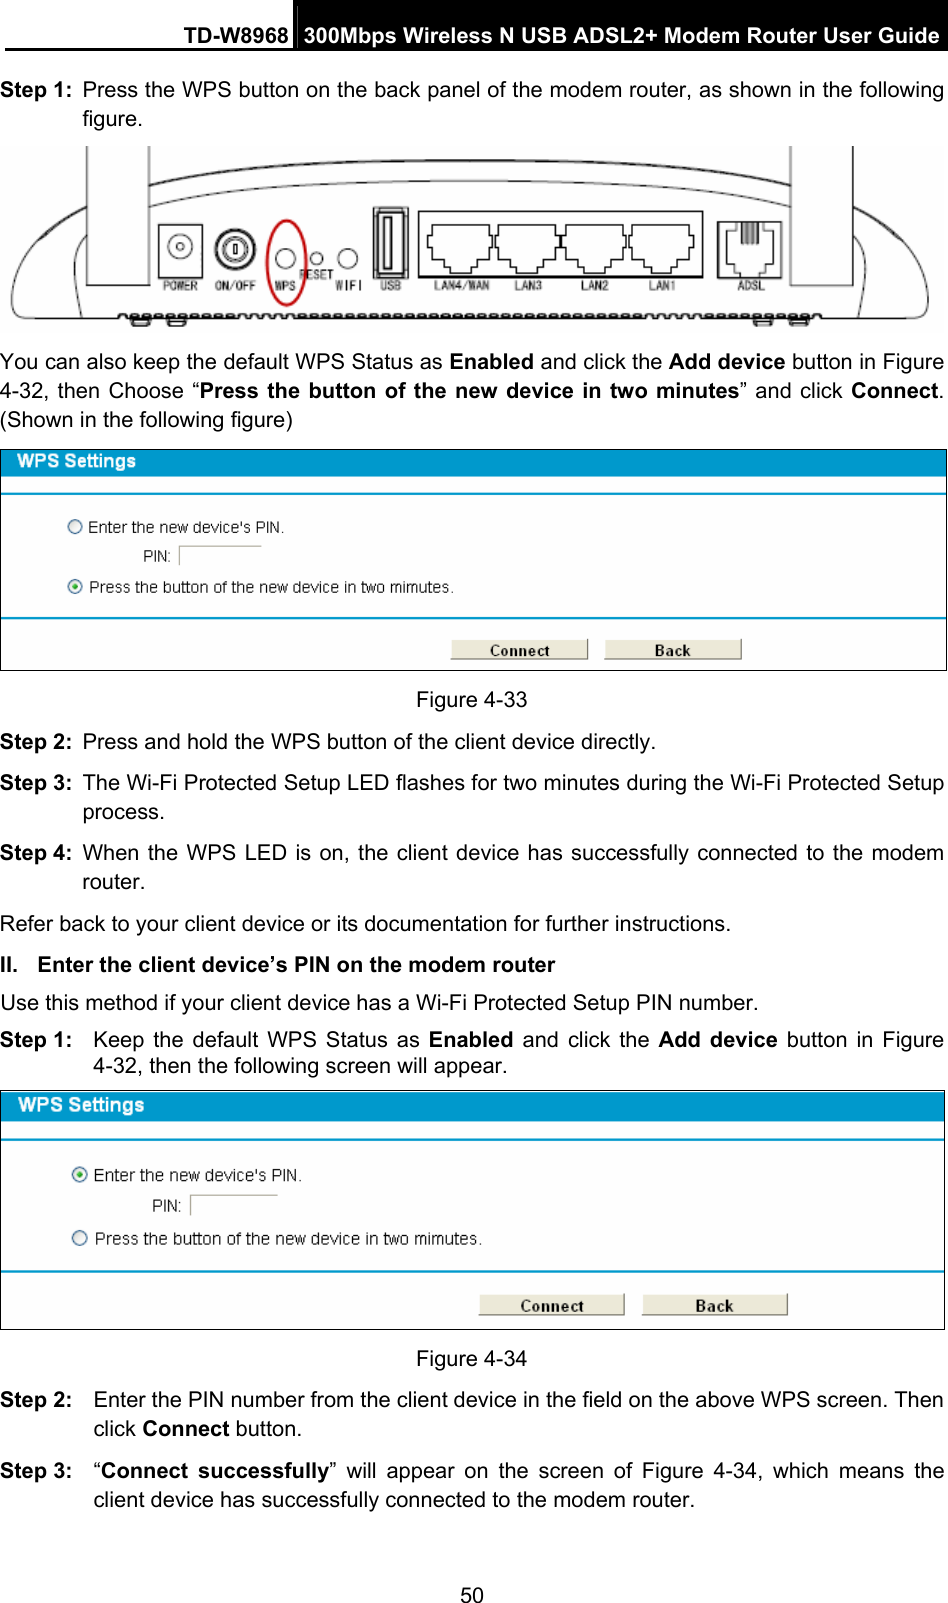 TD-W8968  300Mbps Wireless N USB ADSL2+ Modem Router User Guide 50 Step 1:  Press the WPS button on the back panel of the modem router, as shown in the following figure.  You can also keep the default WPS Status as Enabled and click the Add device button in Figure 4-32, then Choose “Press the button of the new device in two minutes” and click Connect. (Shown in the following figure)  Figure 4-33 Step 2:  Press and hold the WPS button of the client device directly.   Step 3:  The Wi-Fi Protected Setup LED flashes for two minutes during the Wi-Fi Protected Setup process.  Step 4:  When the WPS LED is on, the client device has successfully connected to the modem router.  Refer back to your client device or its documentation for further instructions. II.  Enter the client device’s PIN on the modem router Use this method if your client device has a Wi-Fi Protected Setup PIN number. Step 1:  Keep the default WPS Status as Enabled and click the Add device button in Figure 4-32, then the following screen will appear.    Figure 4-34 Step 2:  Enter the PIN number from the client device in the field on the above WPS screen. Then click Connect button. Step 3:  “Connect successfully” will appear on the screen of Figure 4-34, which means the client device has successfully connected to the modem router. 